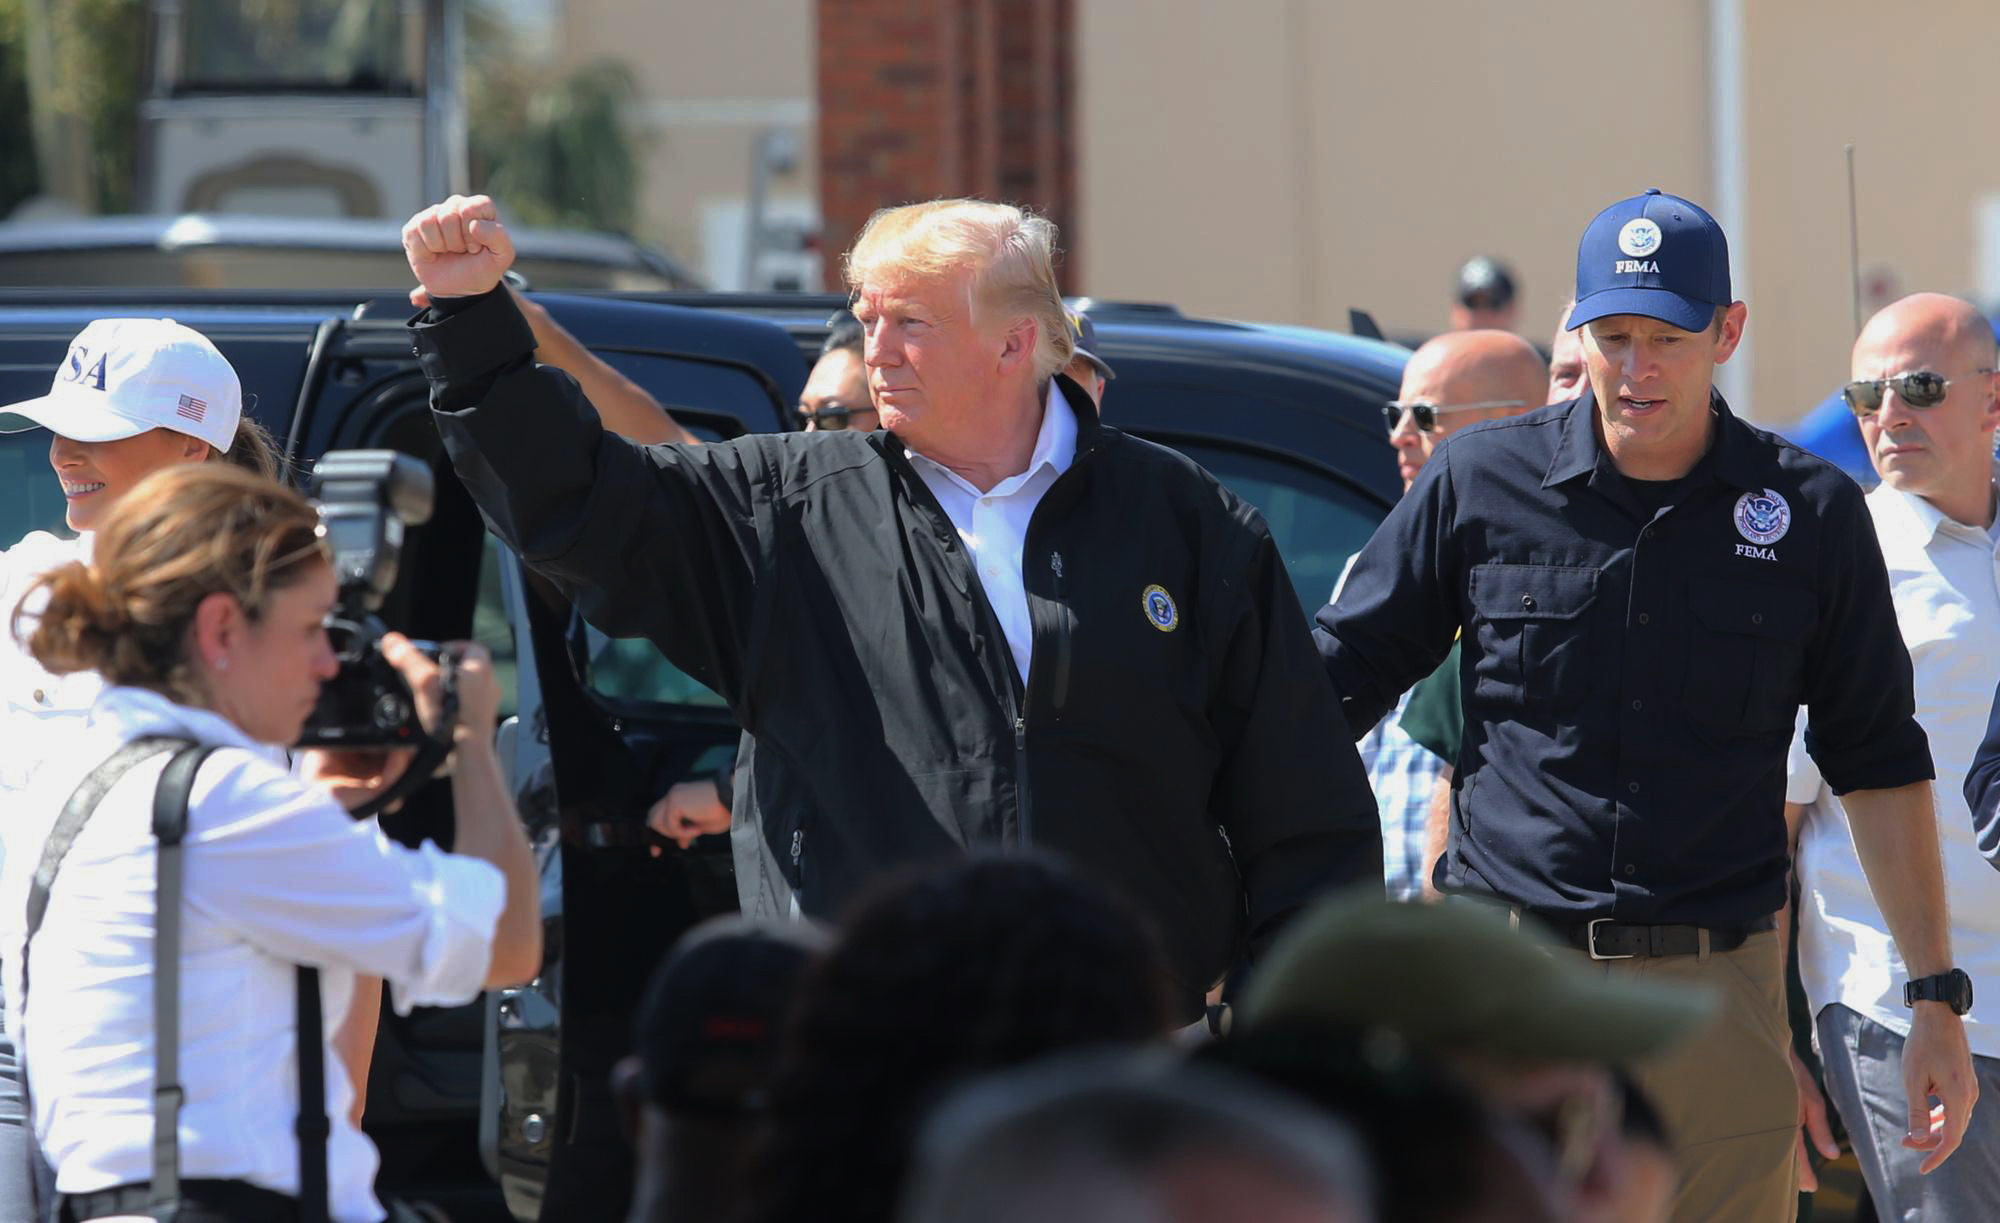 PHOTO: President Donald Trump raises his fist to chants of "USA" during a visit Monday, Oct. 15, 2018, to Lynn Haven, Fla., to see storm damage and recovery efforts following Hurricane Michael.